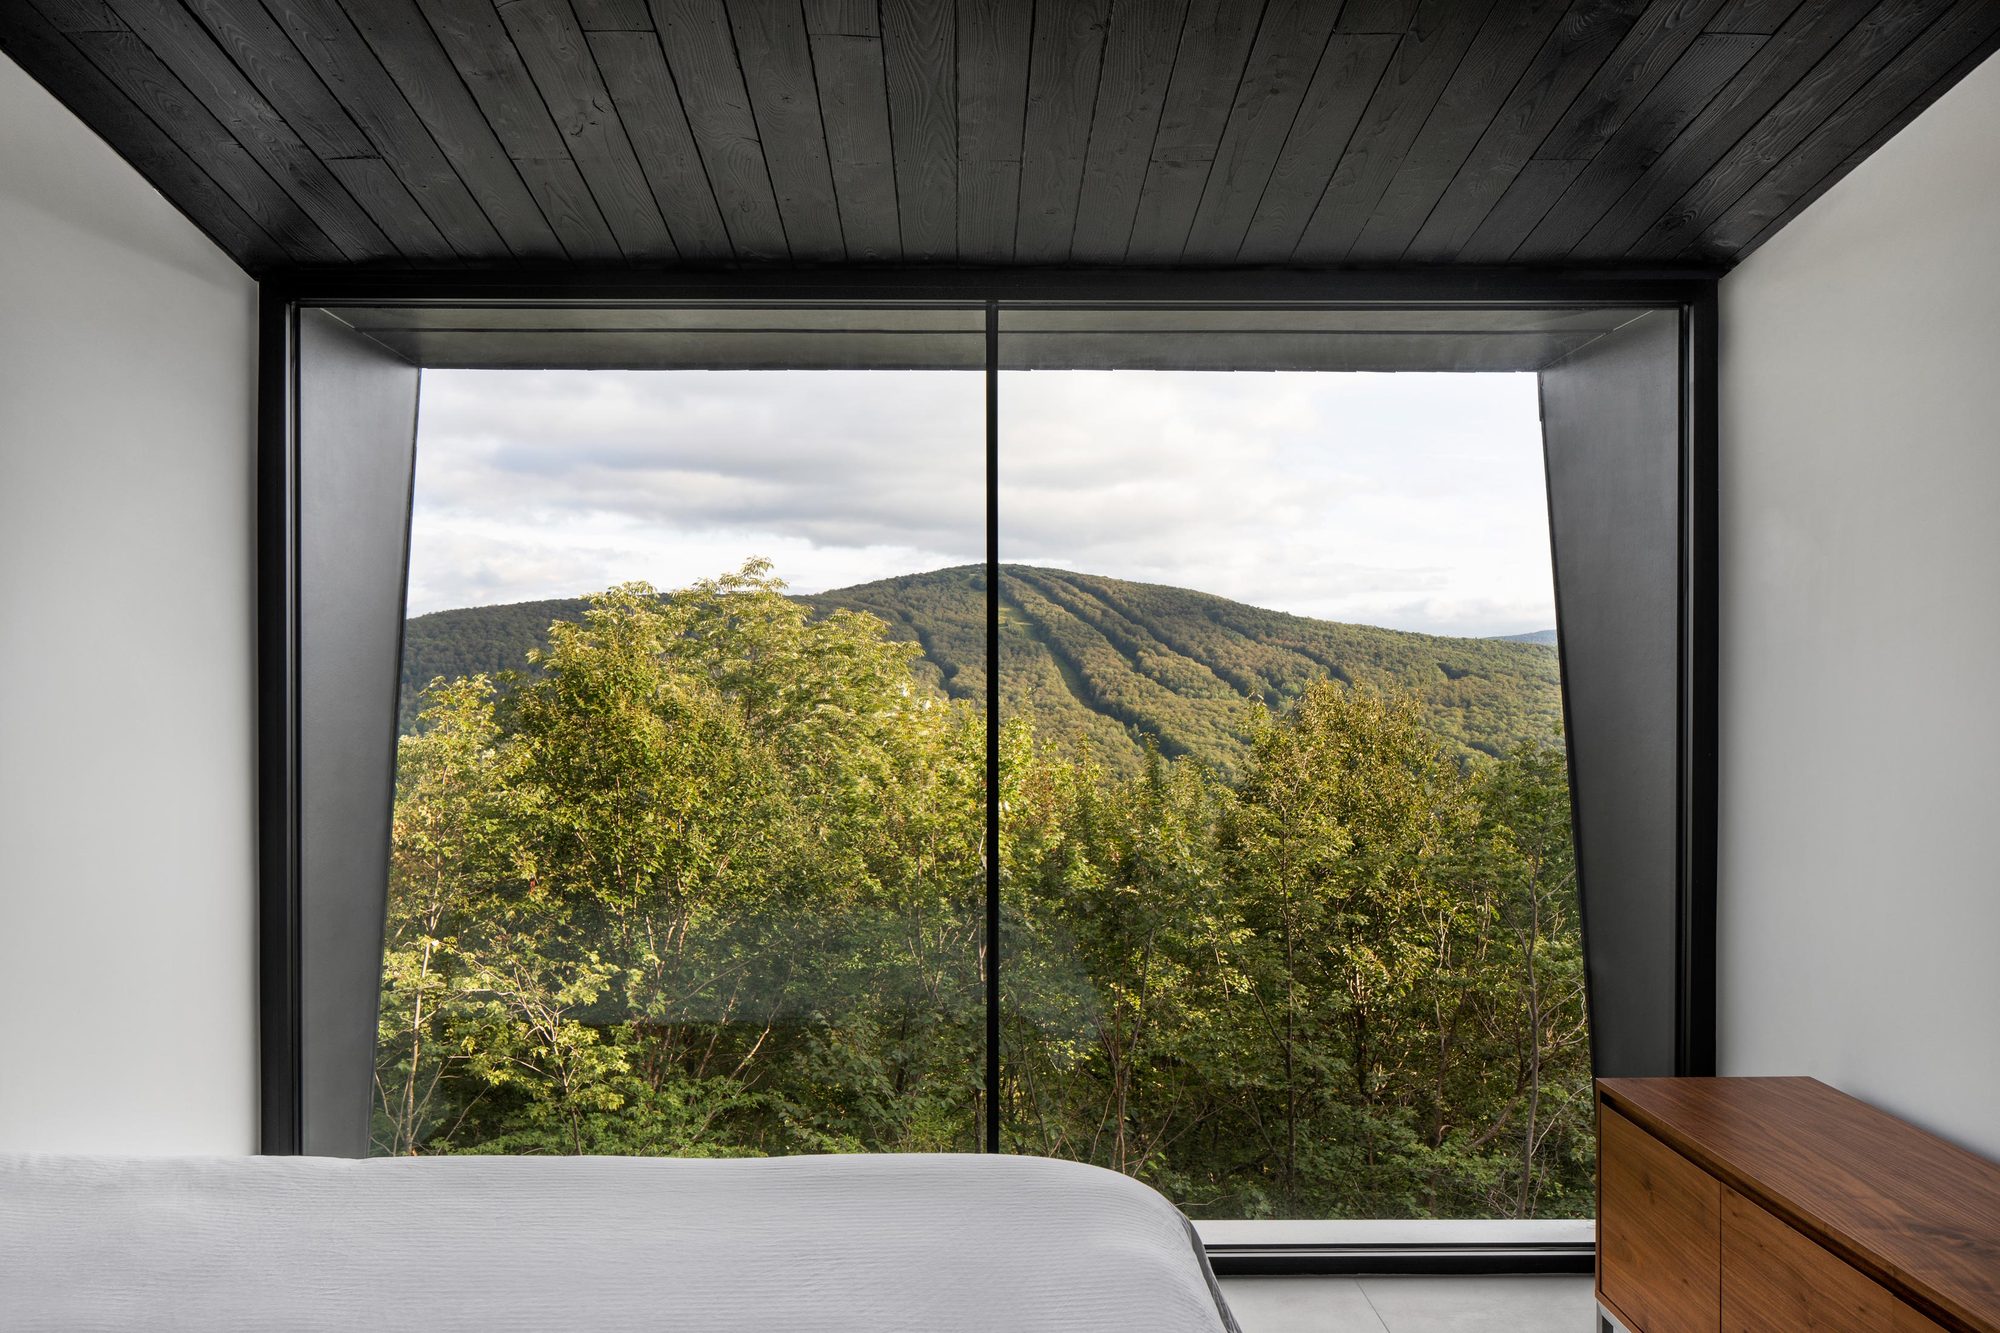 It is forest everywhere as you look outside the bedroom floor-to-ceiling window